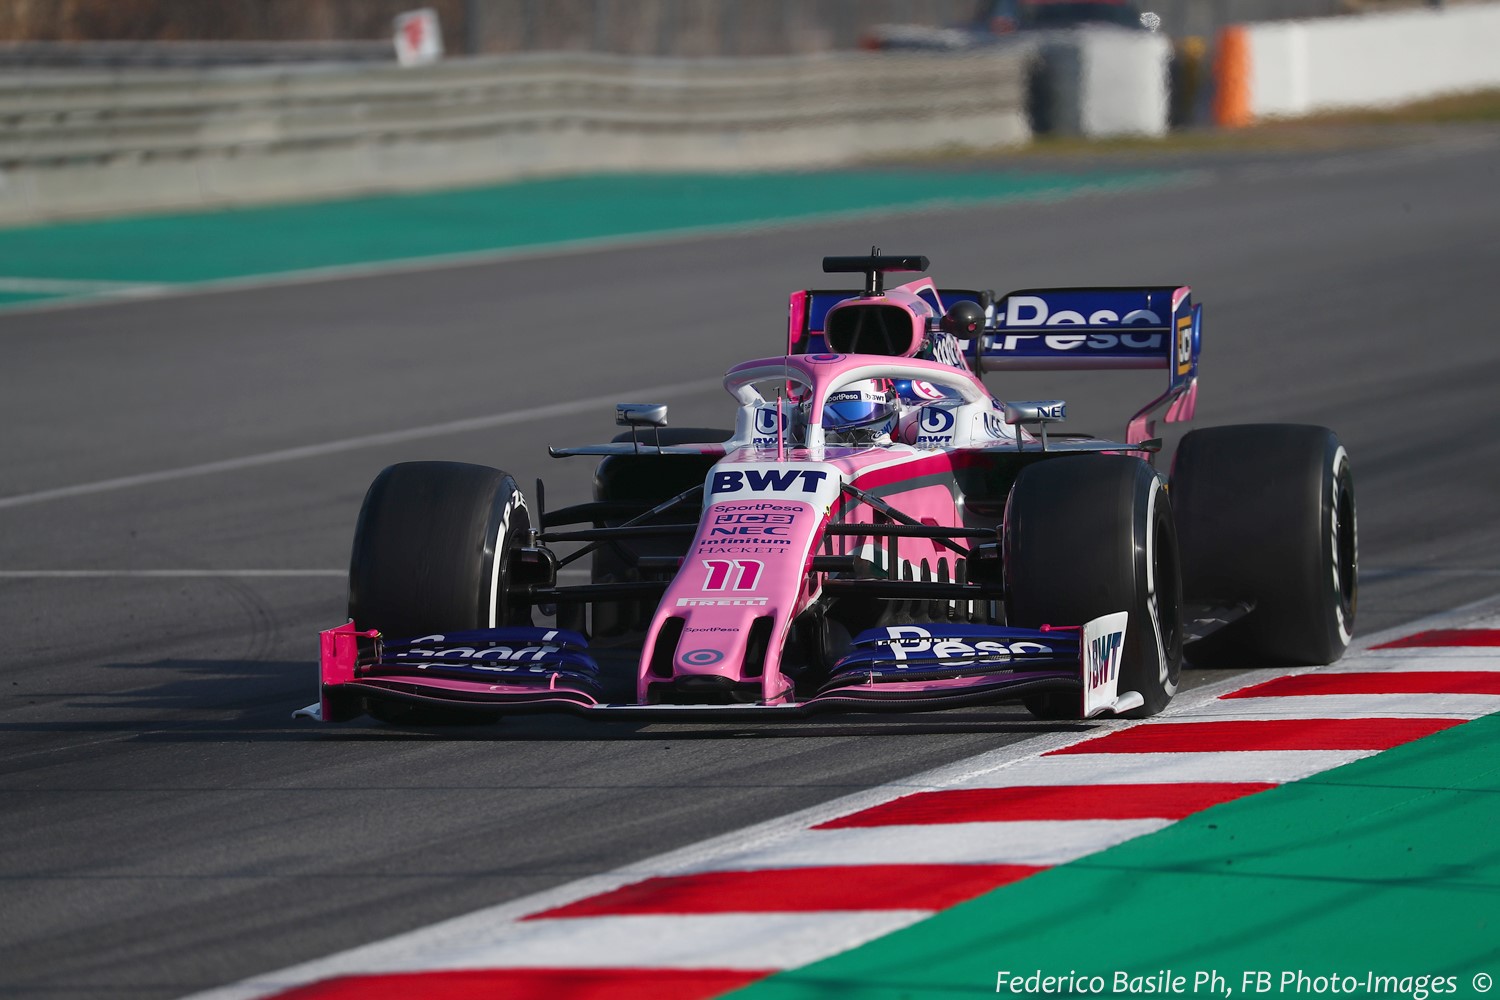 Sergio Perez in the pink Racing Point Mercedes